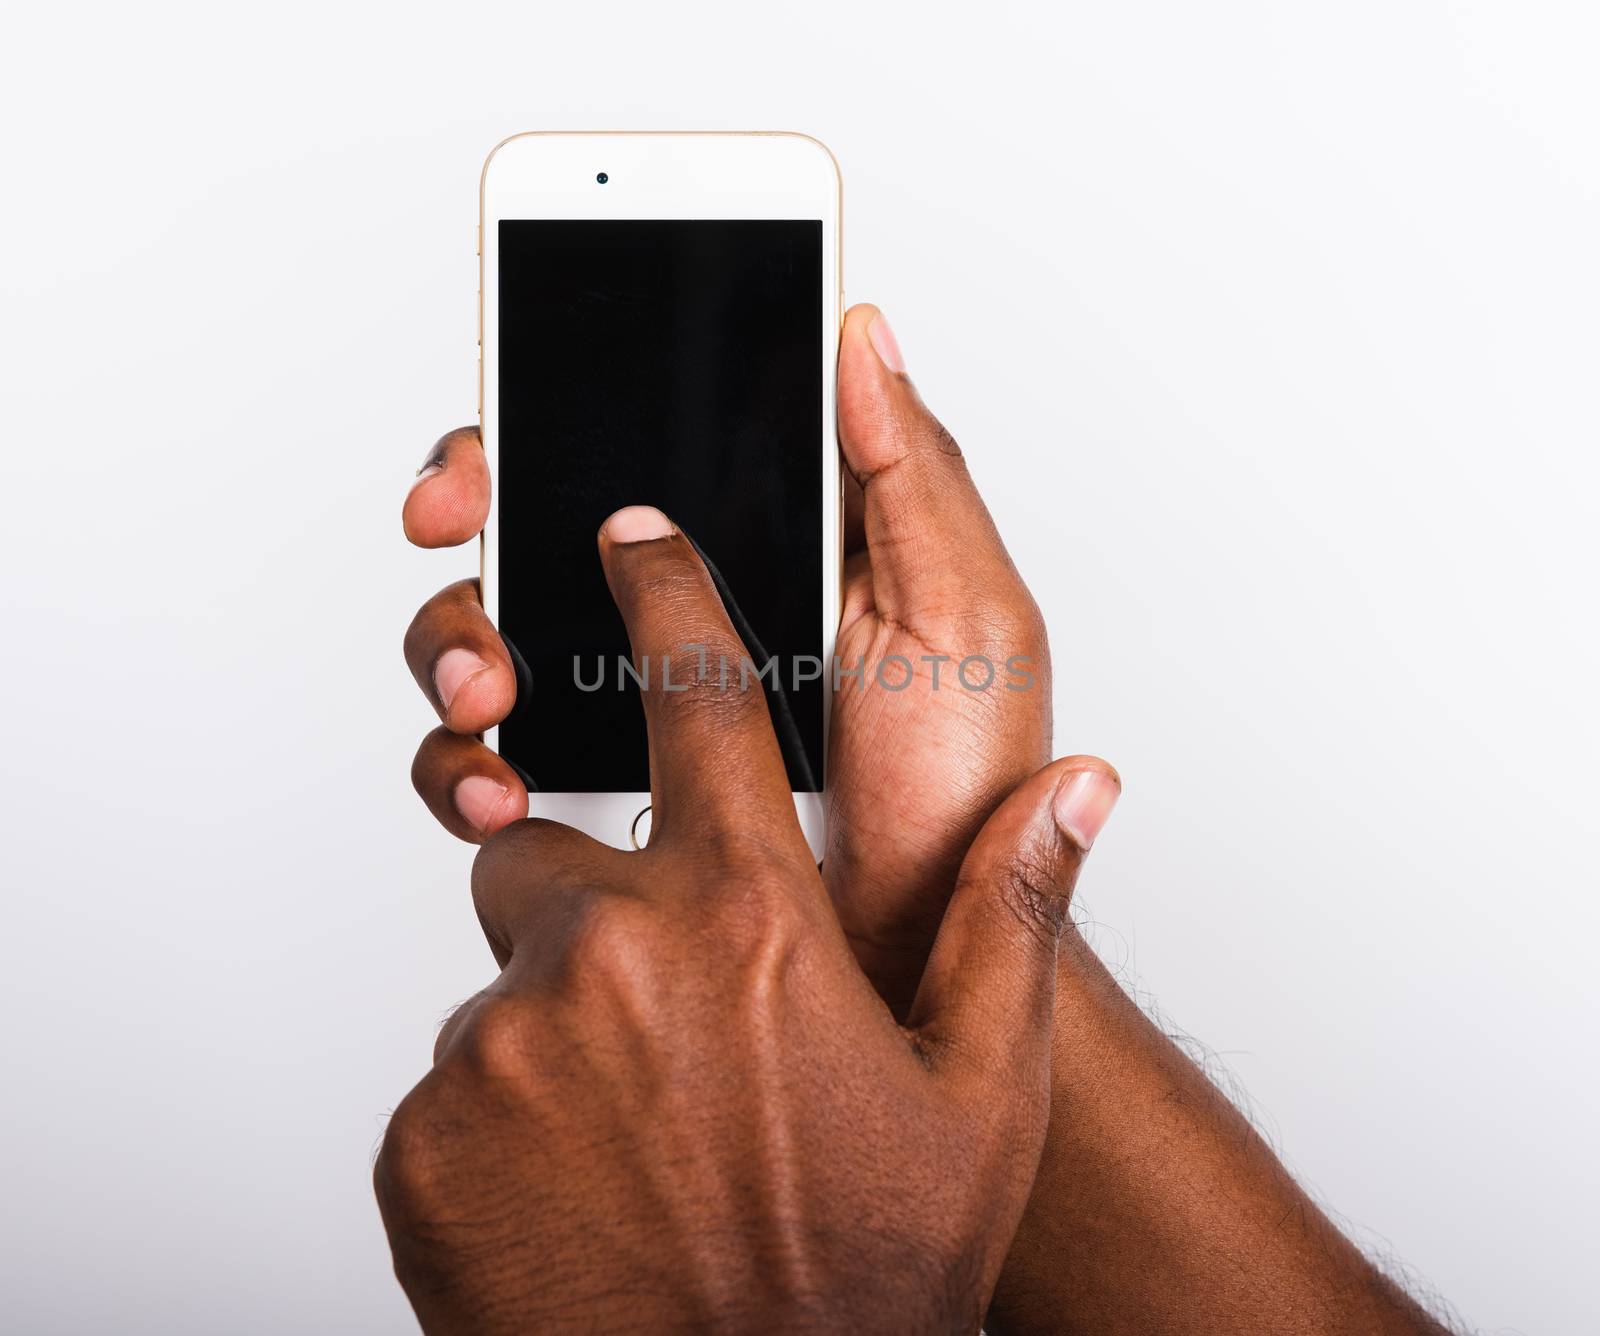 Closeup hand black man holding mockup white modern digital mobile smart phone blank screen on hand and point a finger to touch the screen, studio shot isolated on white background